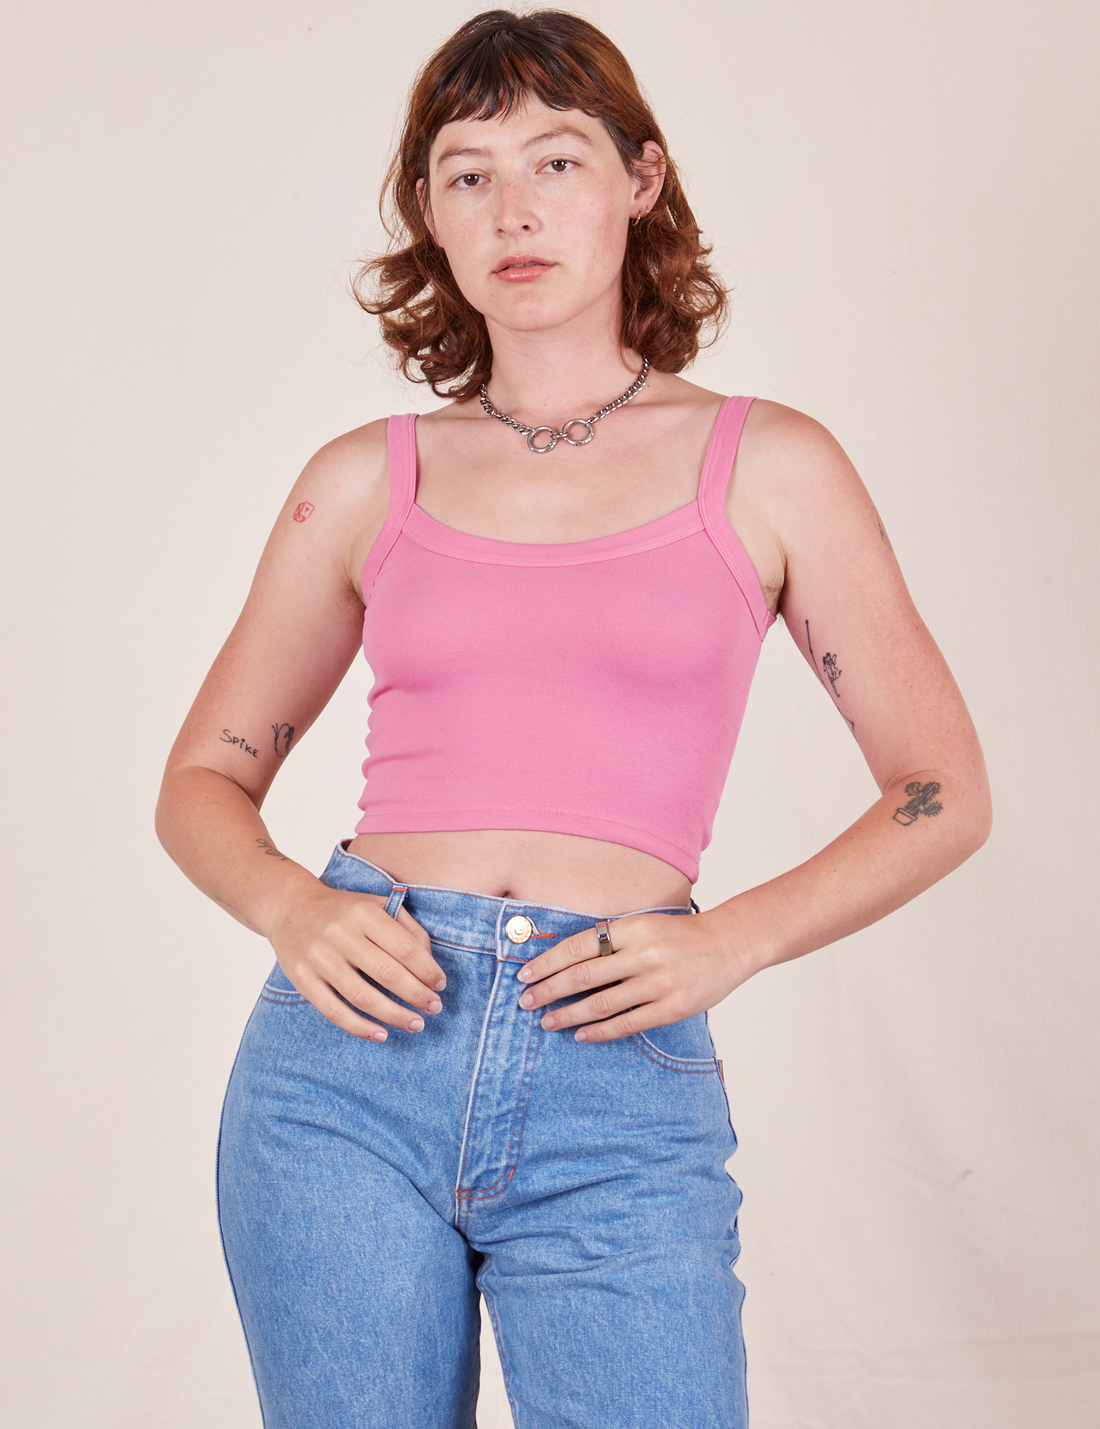 Alex is wearing Cropped Cami in Bubblegum Pink and light wash Frontier Jeans